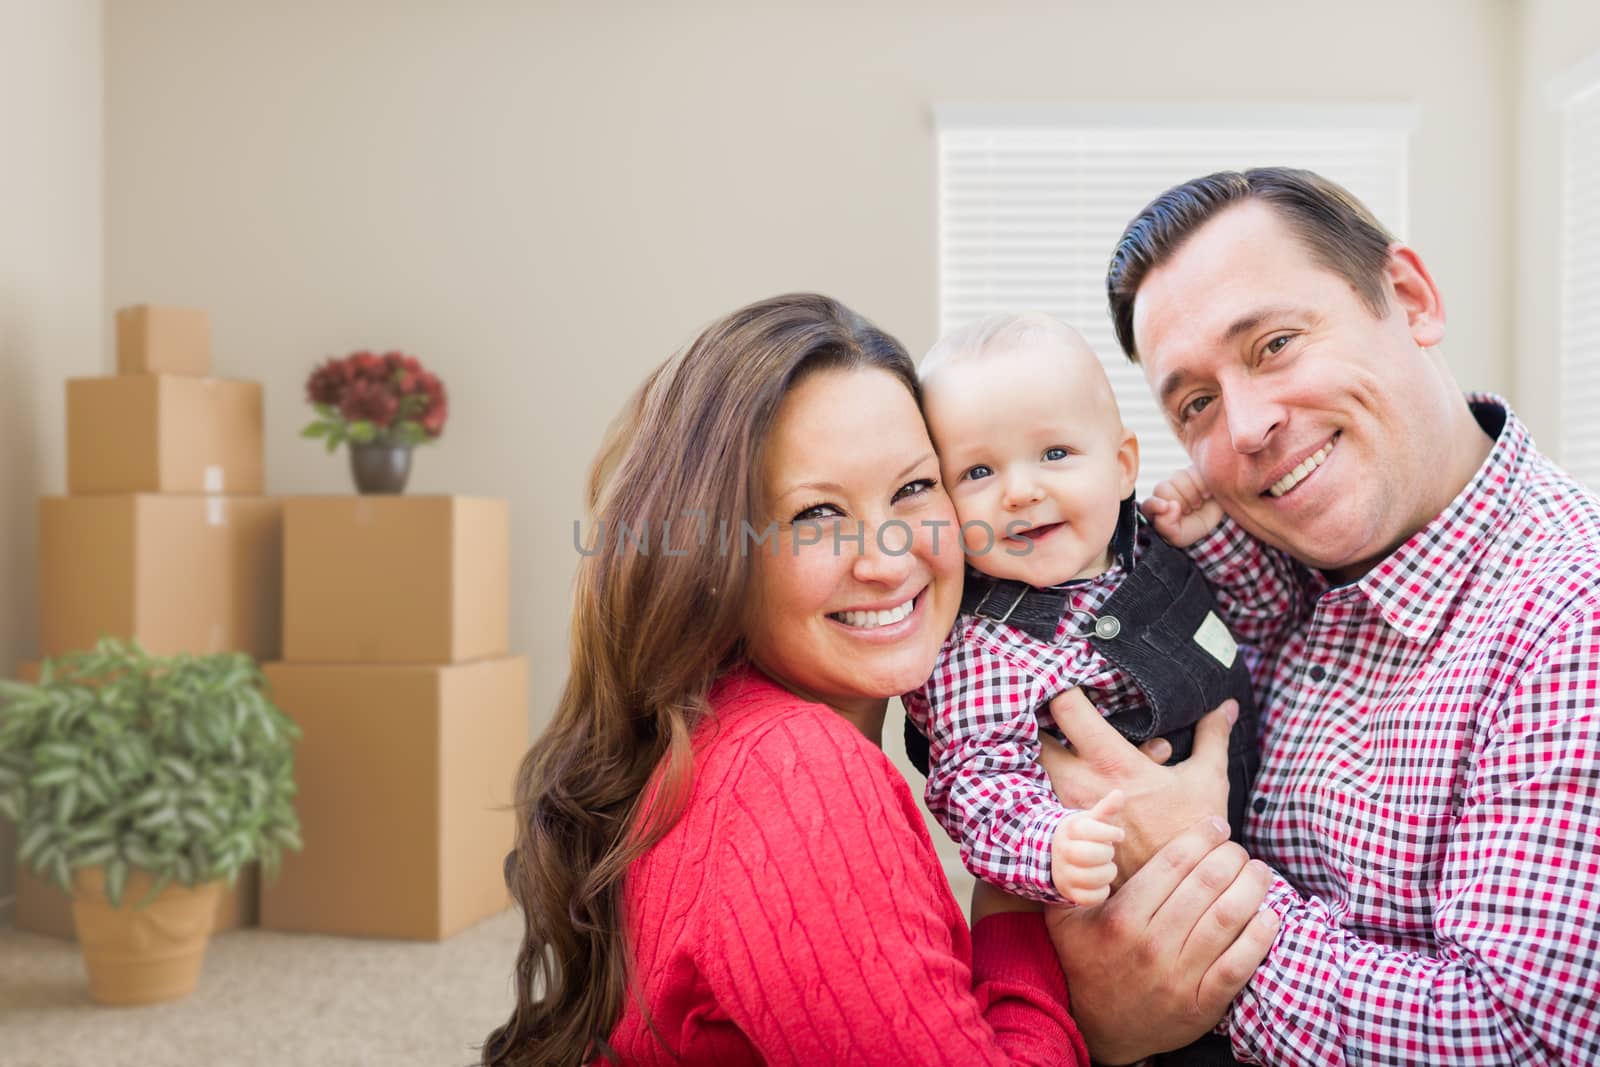 Caucasian Family with Baby In Room with Moving Boxes by Feverpitched